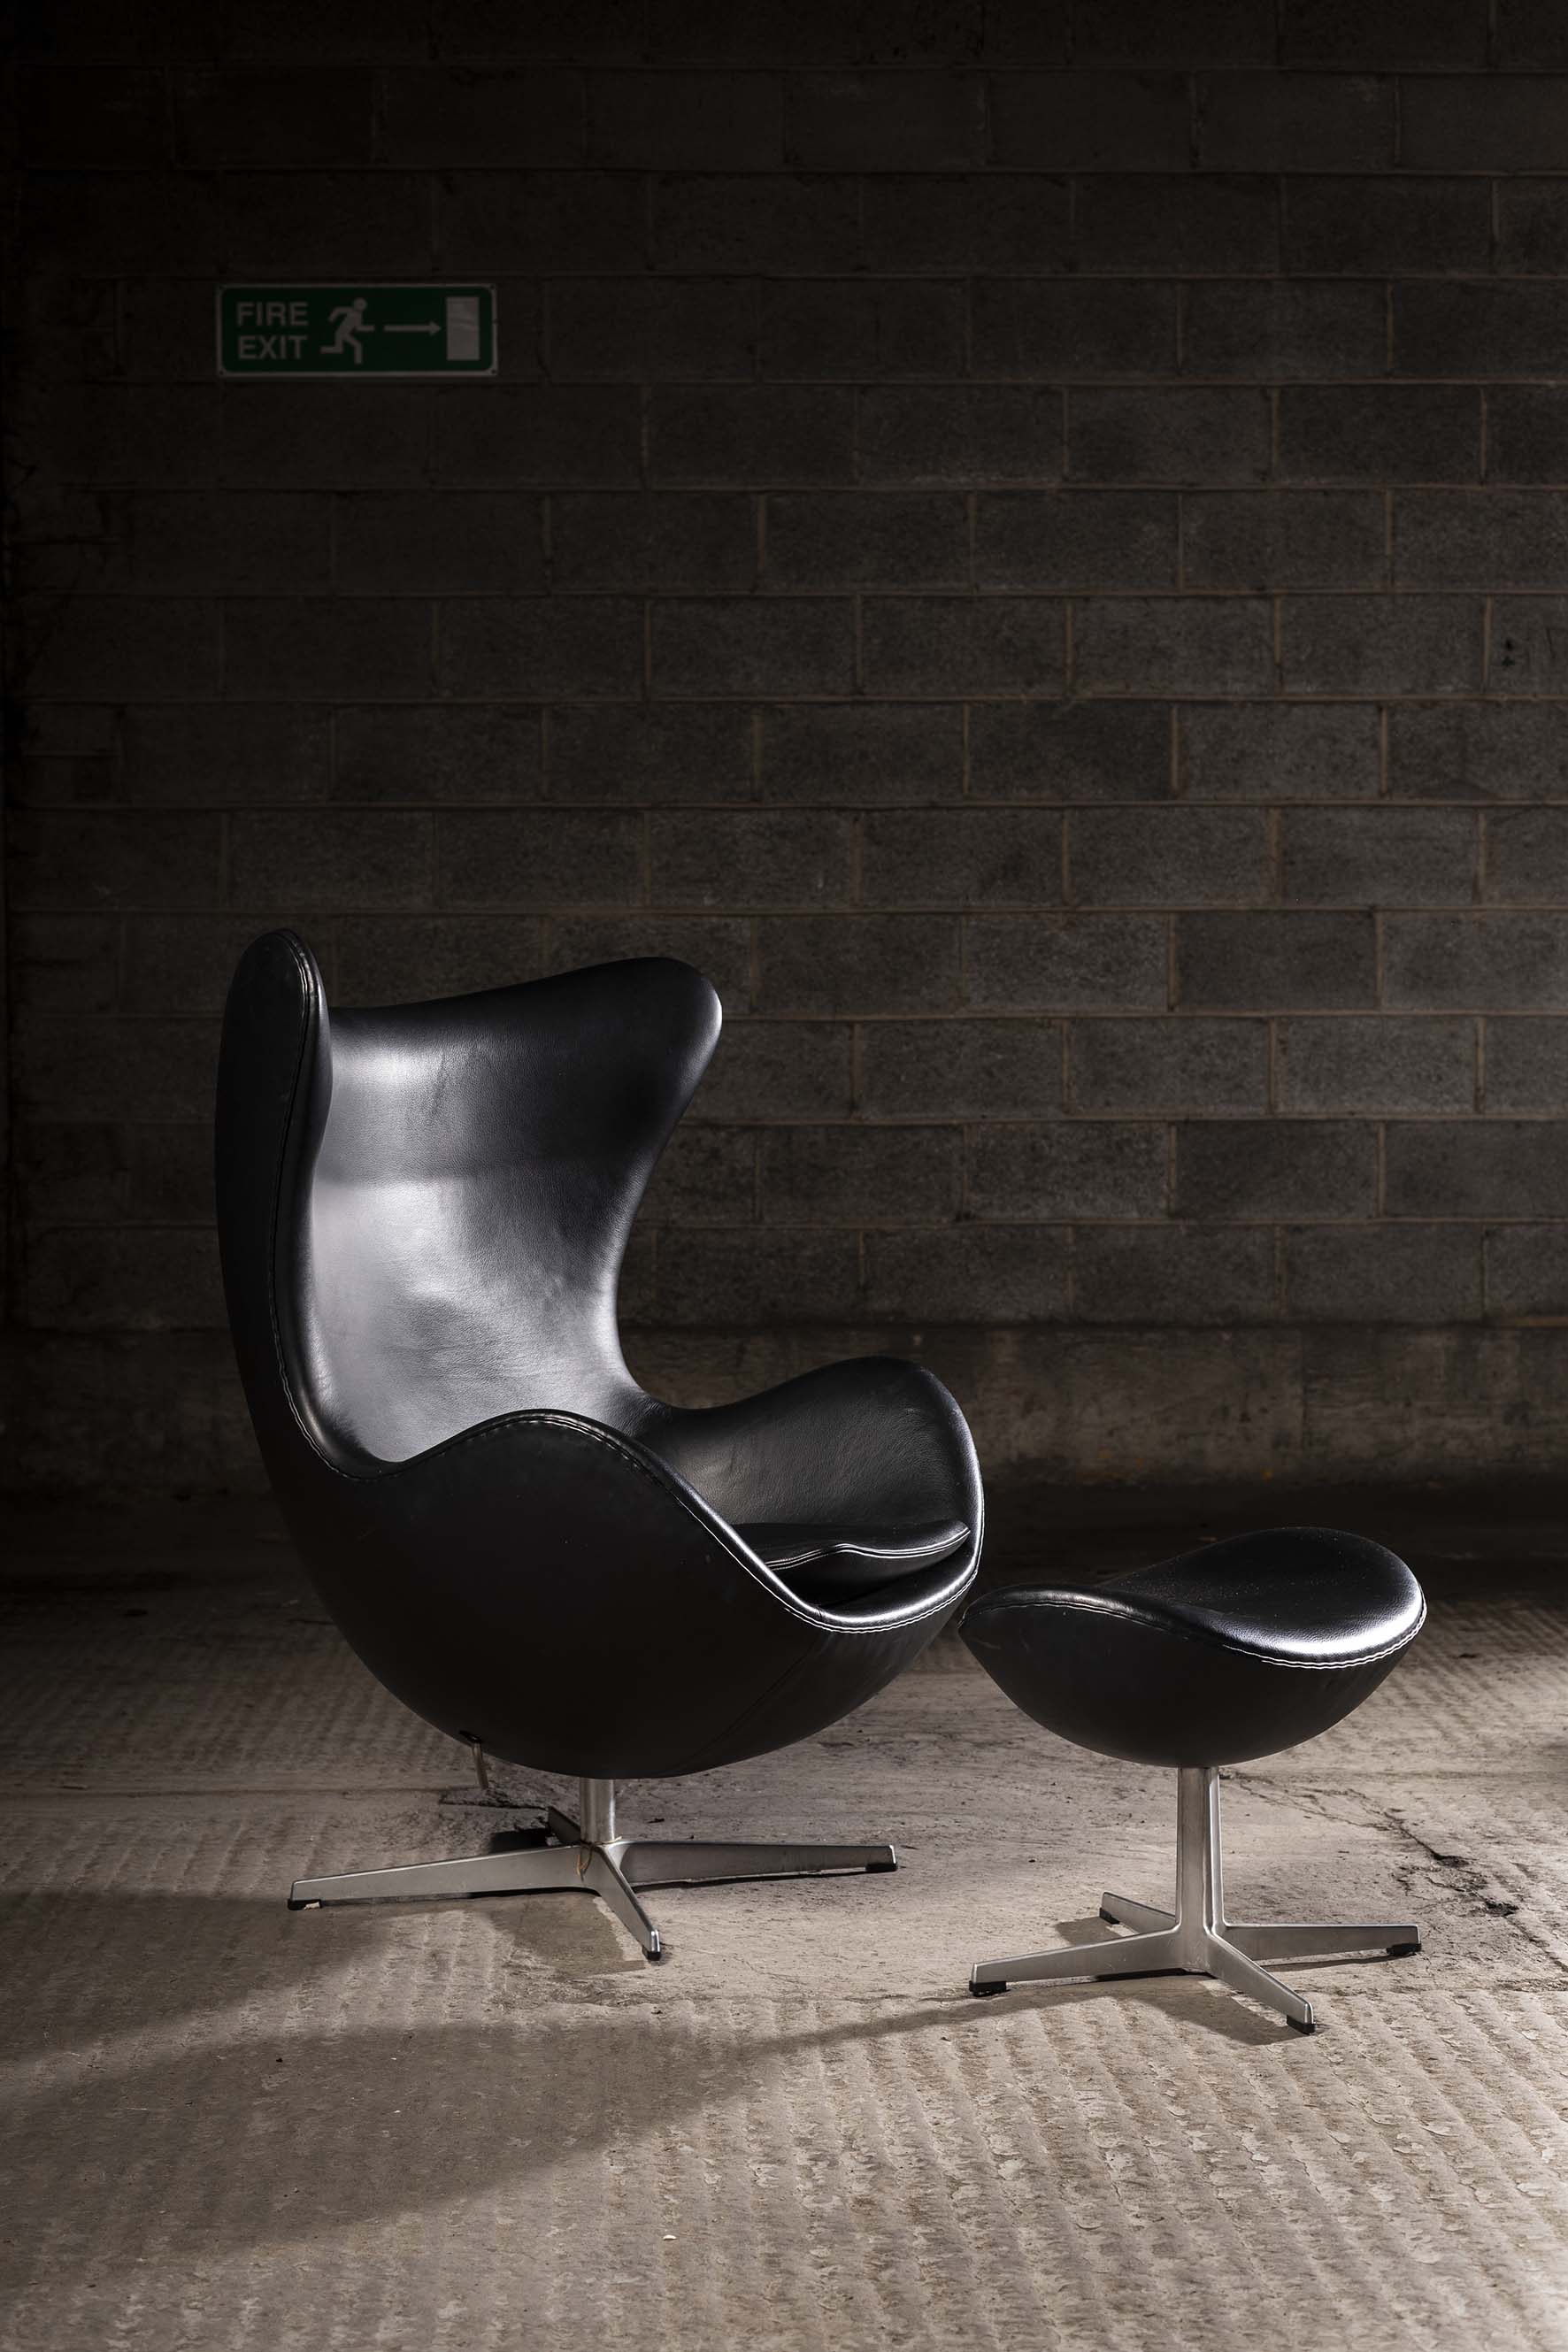 THE EGG CHAIR AND OTTOMAN, BY ARNE JACOBSEN FOR FRITZ HANSEN, EDITION 2008, in hand stitched black